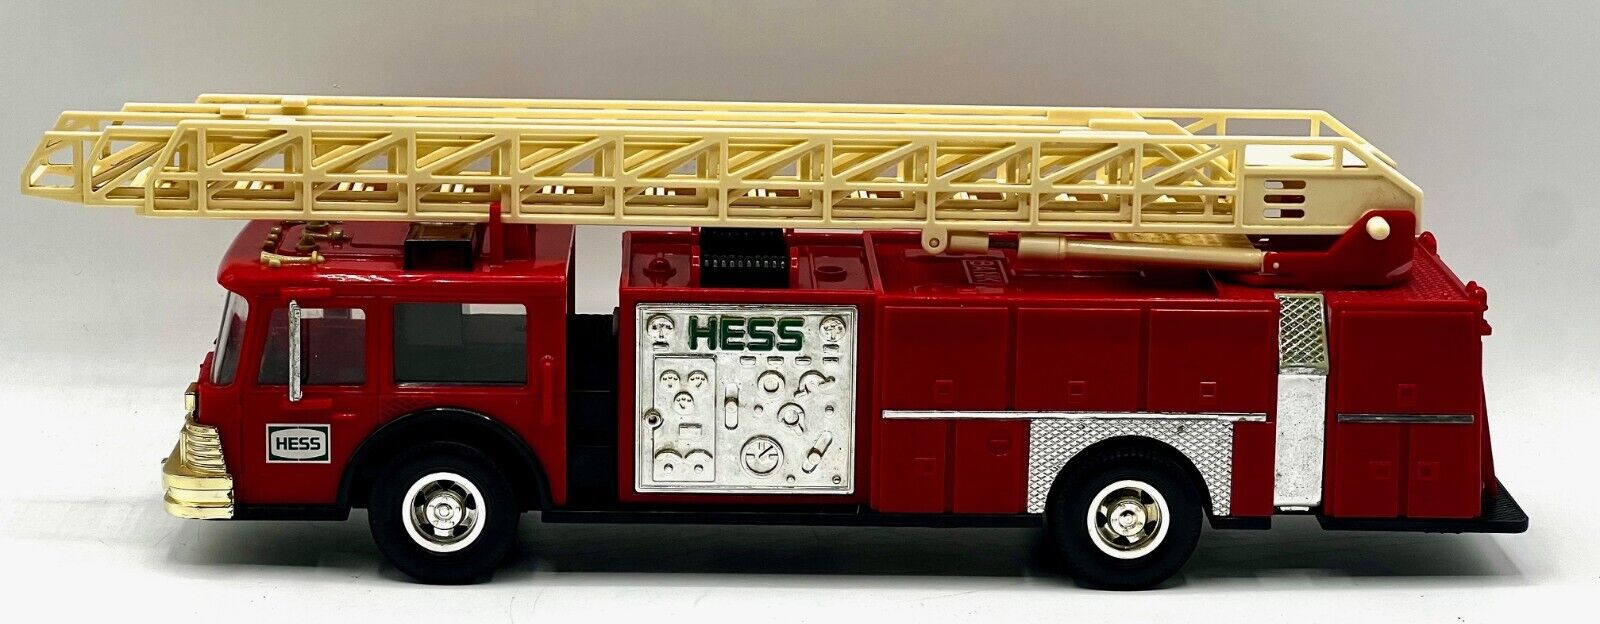 1986 Hess Toy Fire Truck Bank. Box not Included.  Great Condition